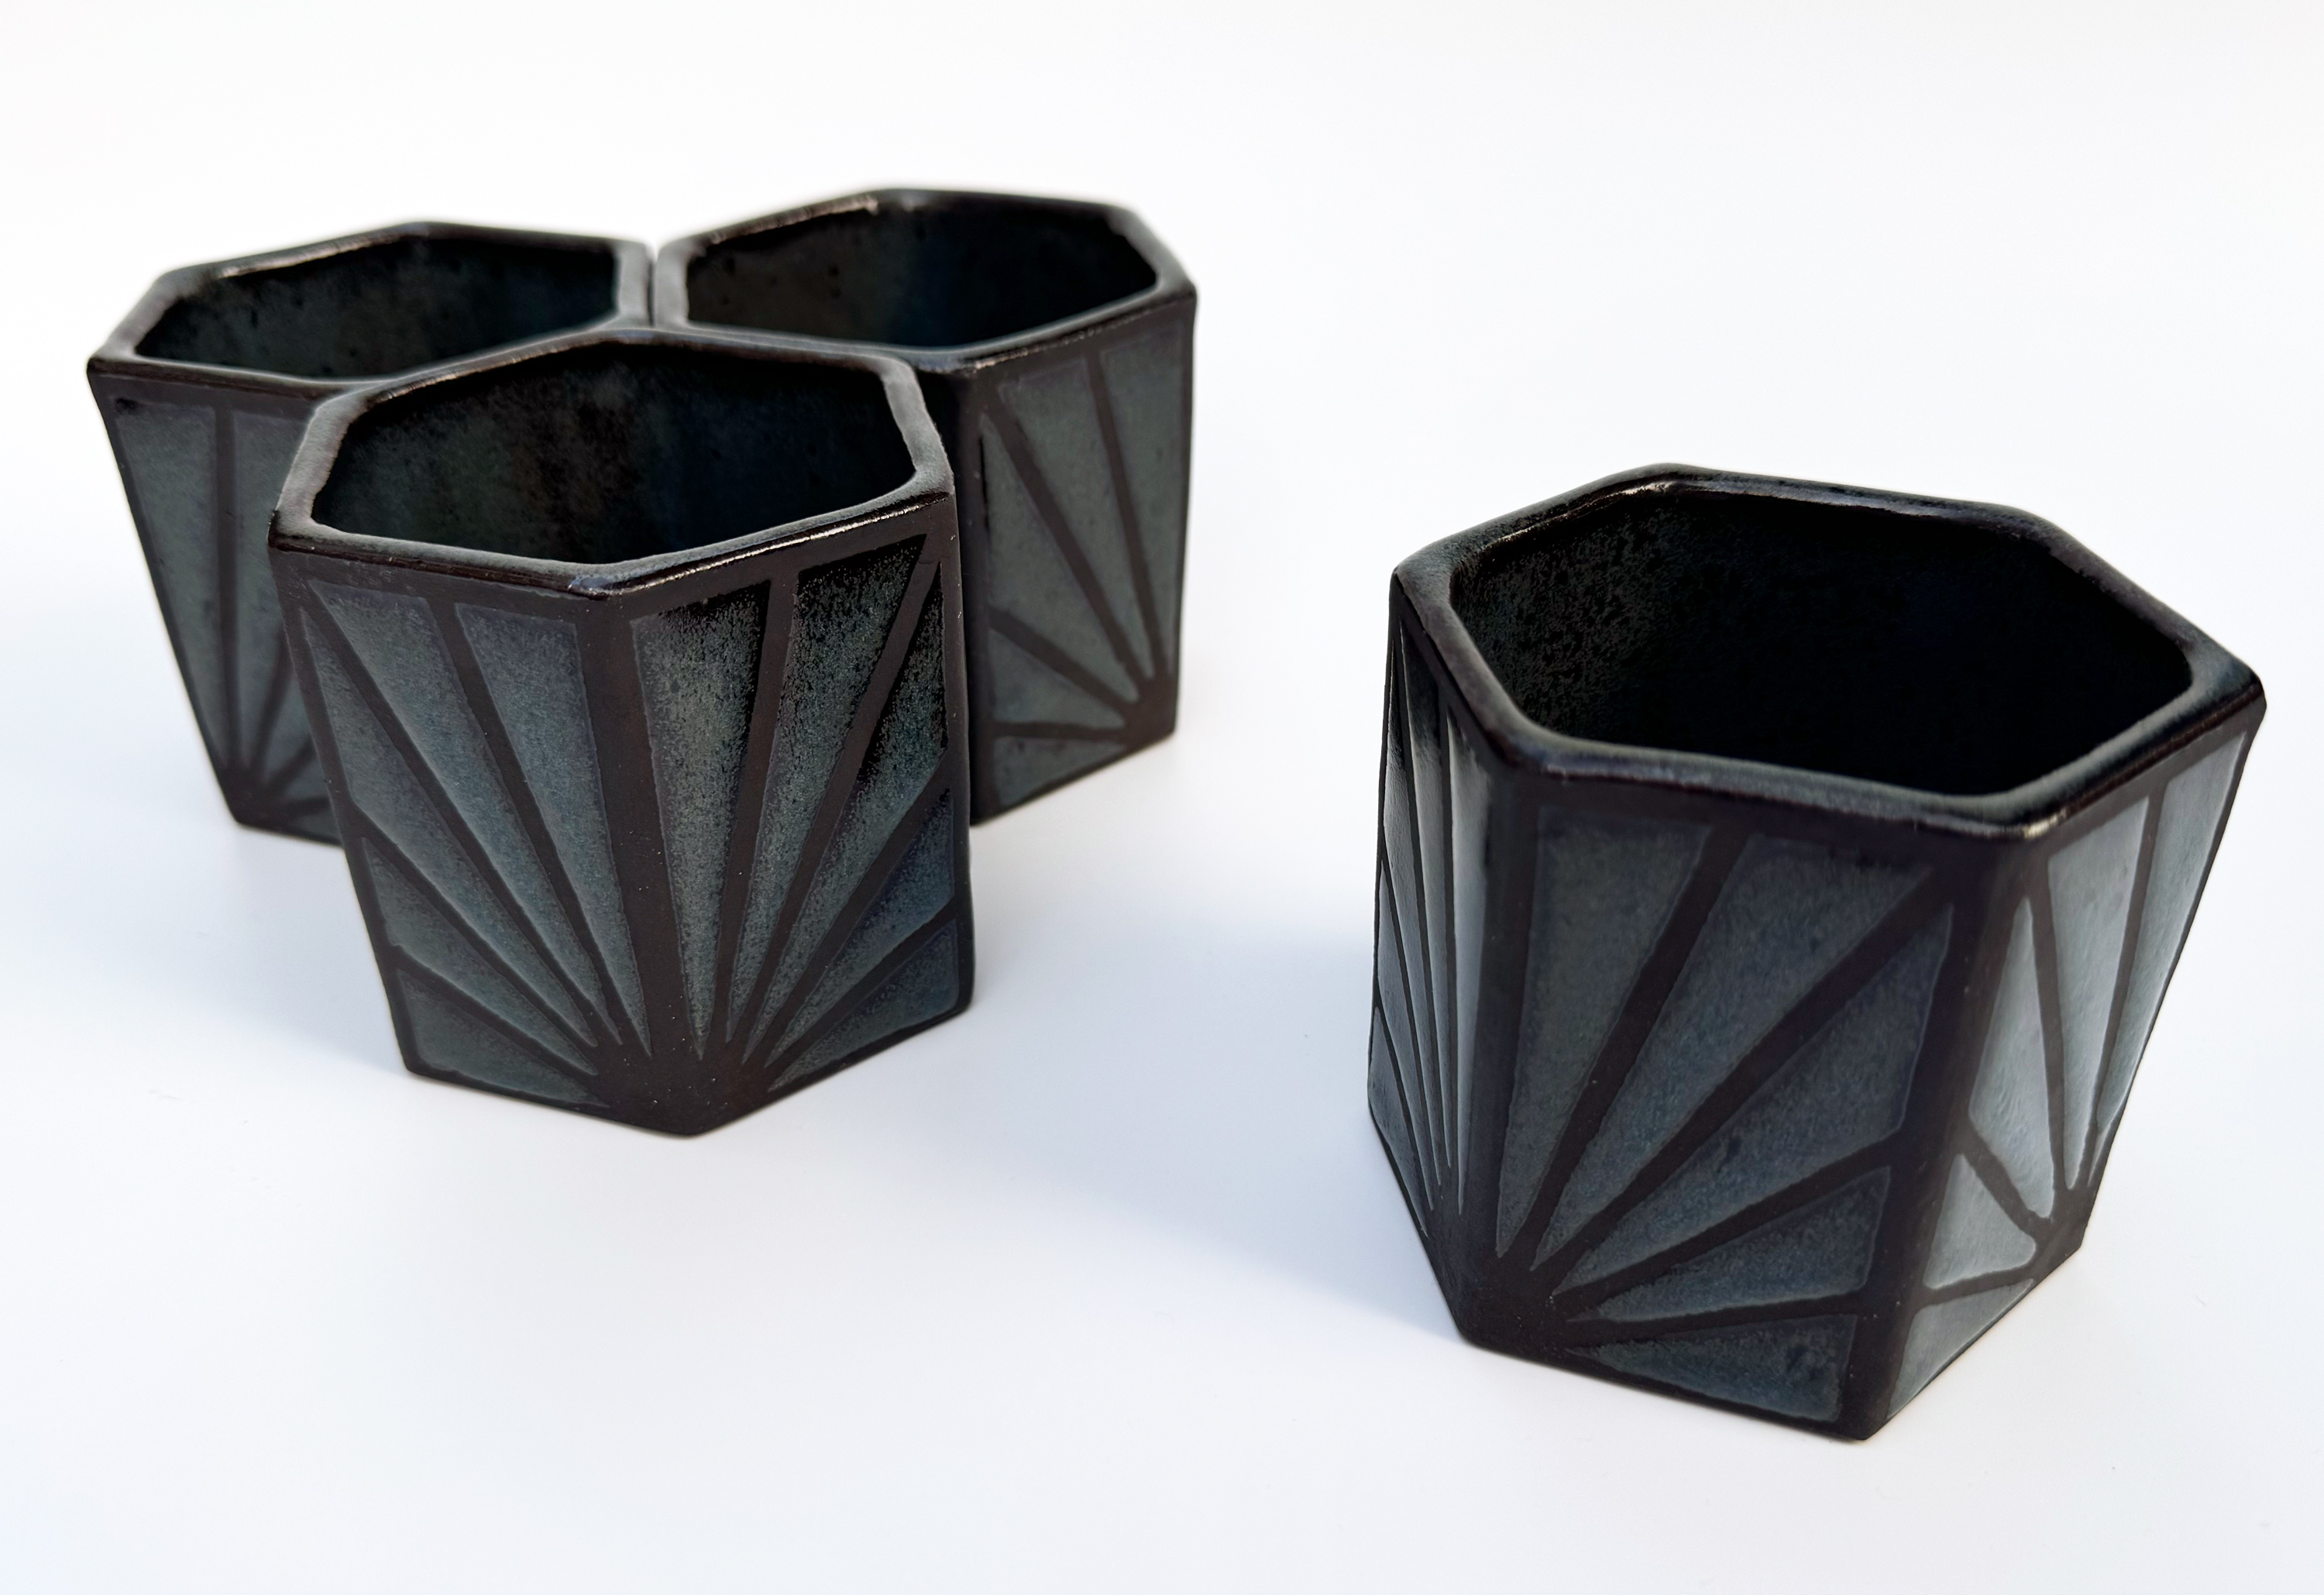 These black stoneware teacups have hexagonal bottoms and openings and six straight sides.